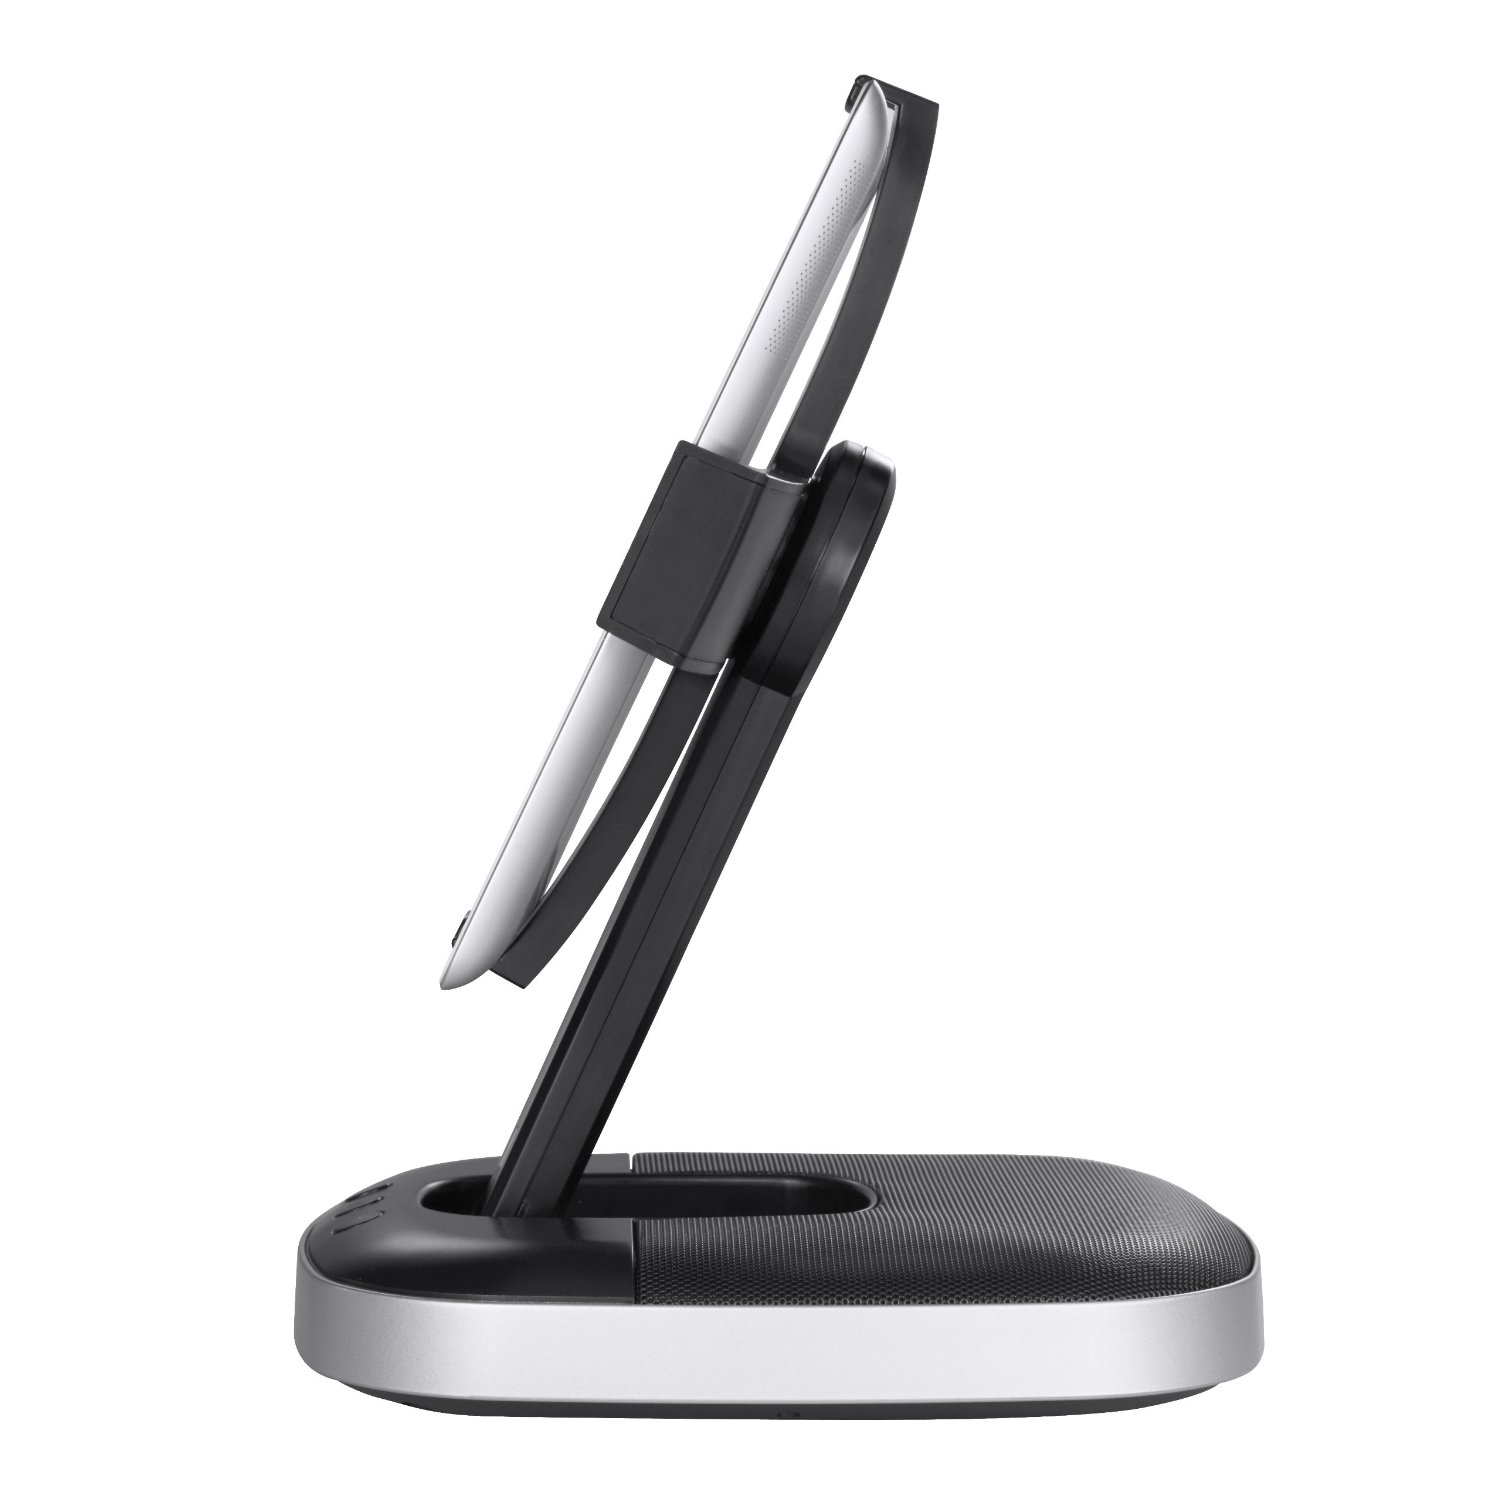 http://thetechjournal.com/wp-content/uploads/images/1203/1331142371-logitech-speaker-stand-and-charging-station-for-ipad--7.jpg